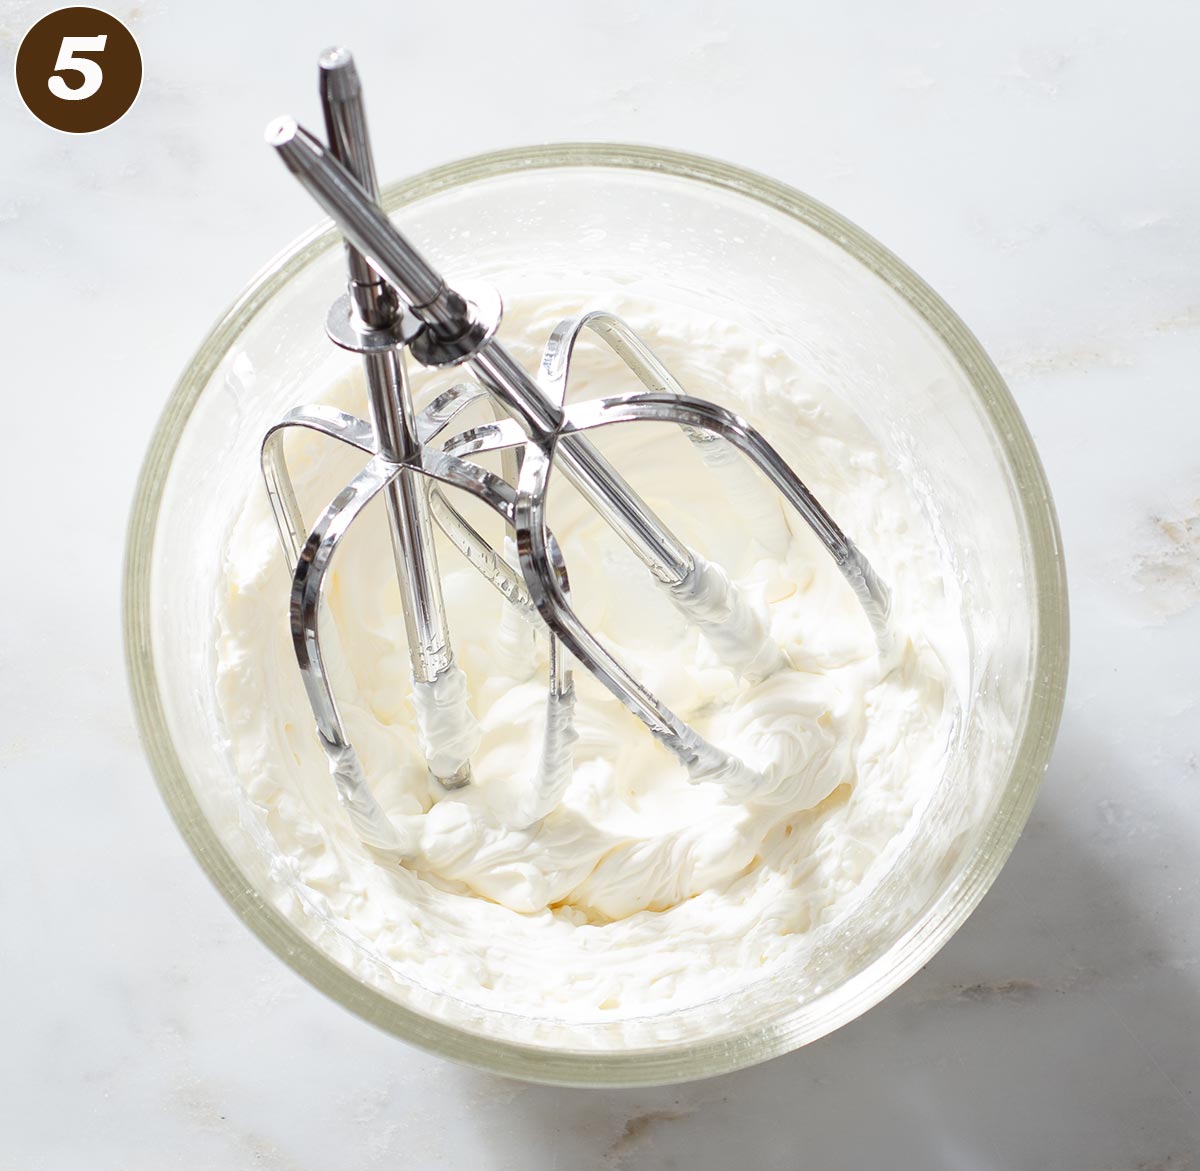 Whipped cream in a bowl with beaters.